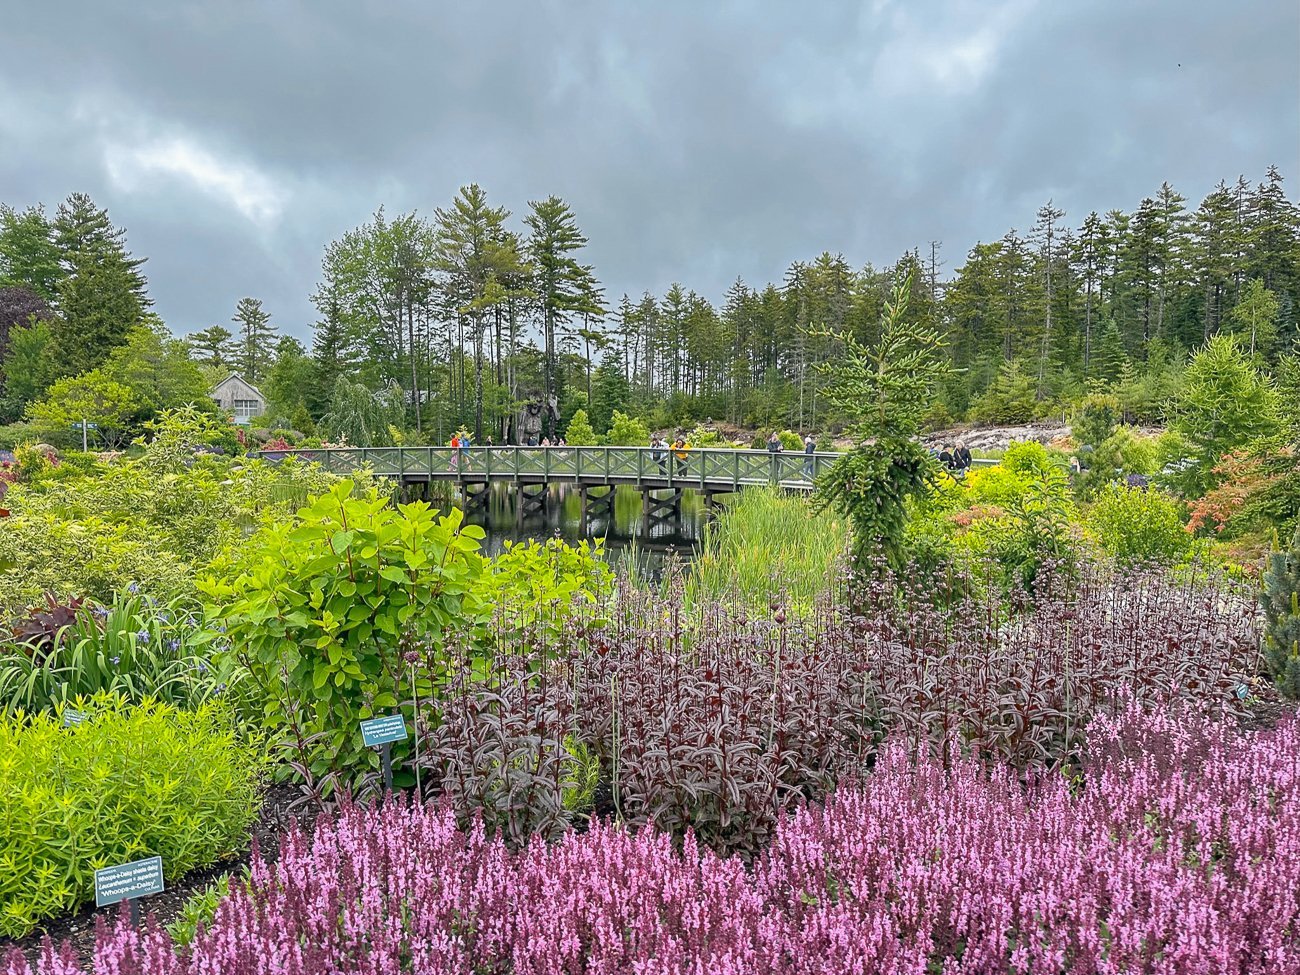 Coastal Maine Botanical Garden bridge over a pond with pink and purple flowers and evergreen trees